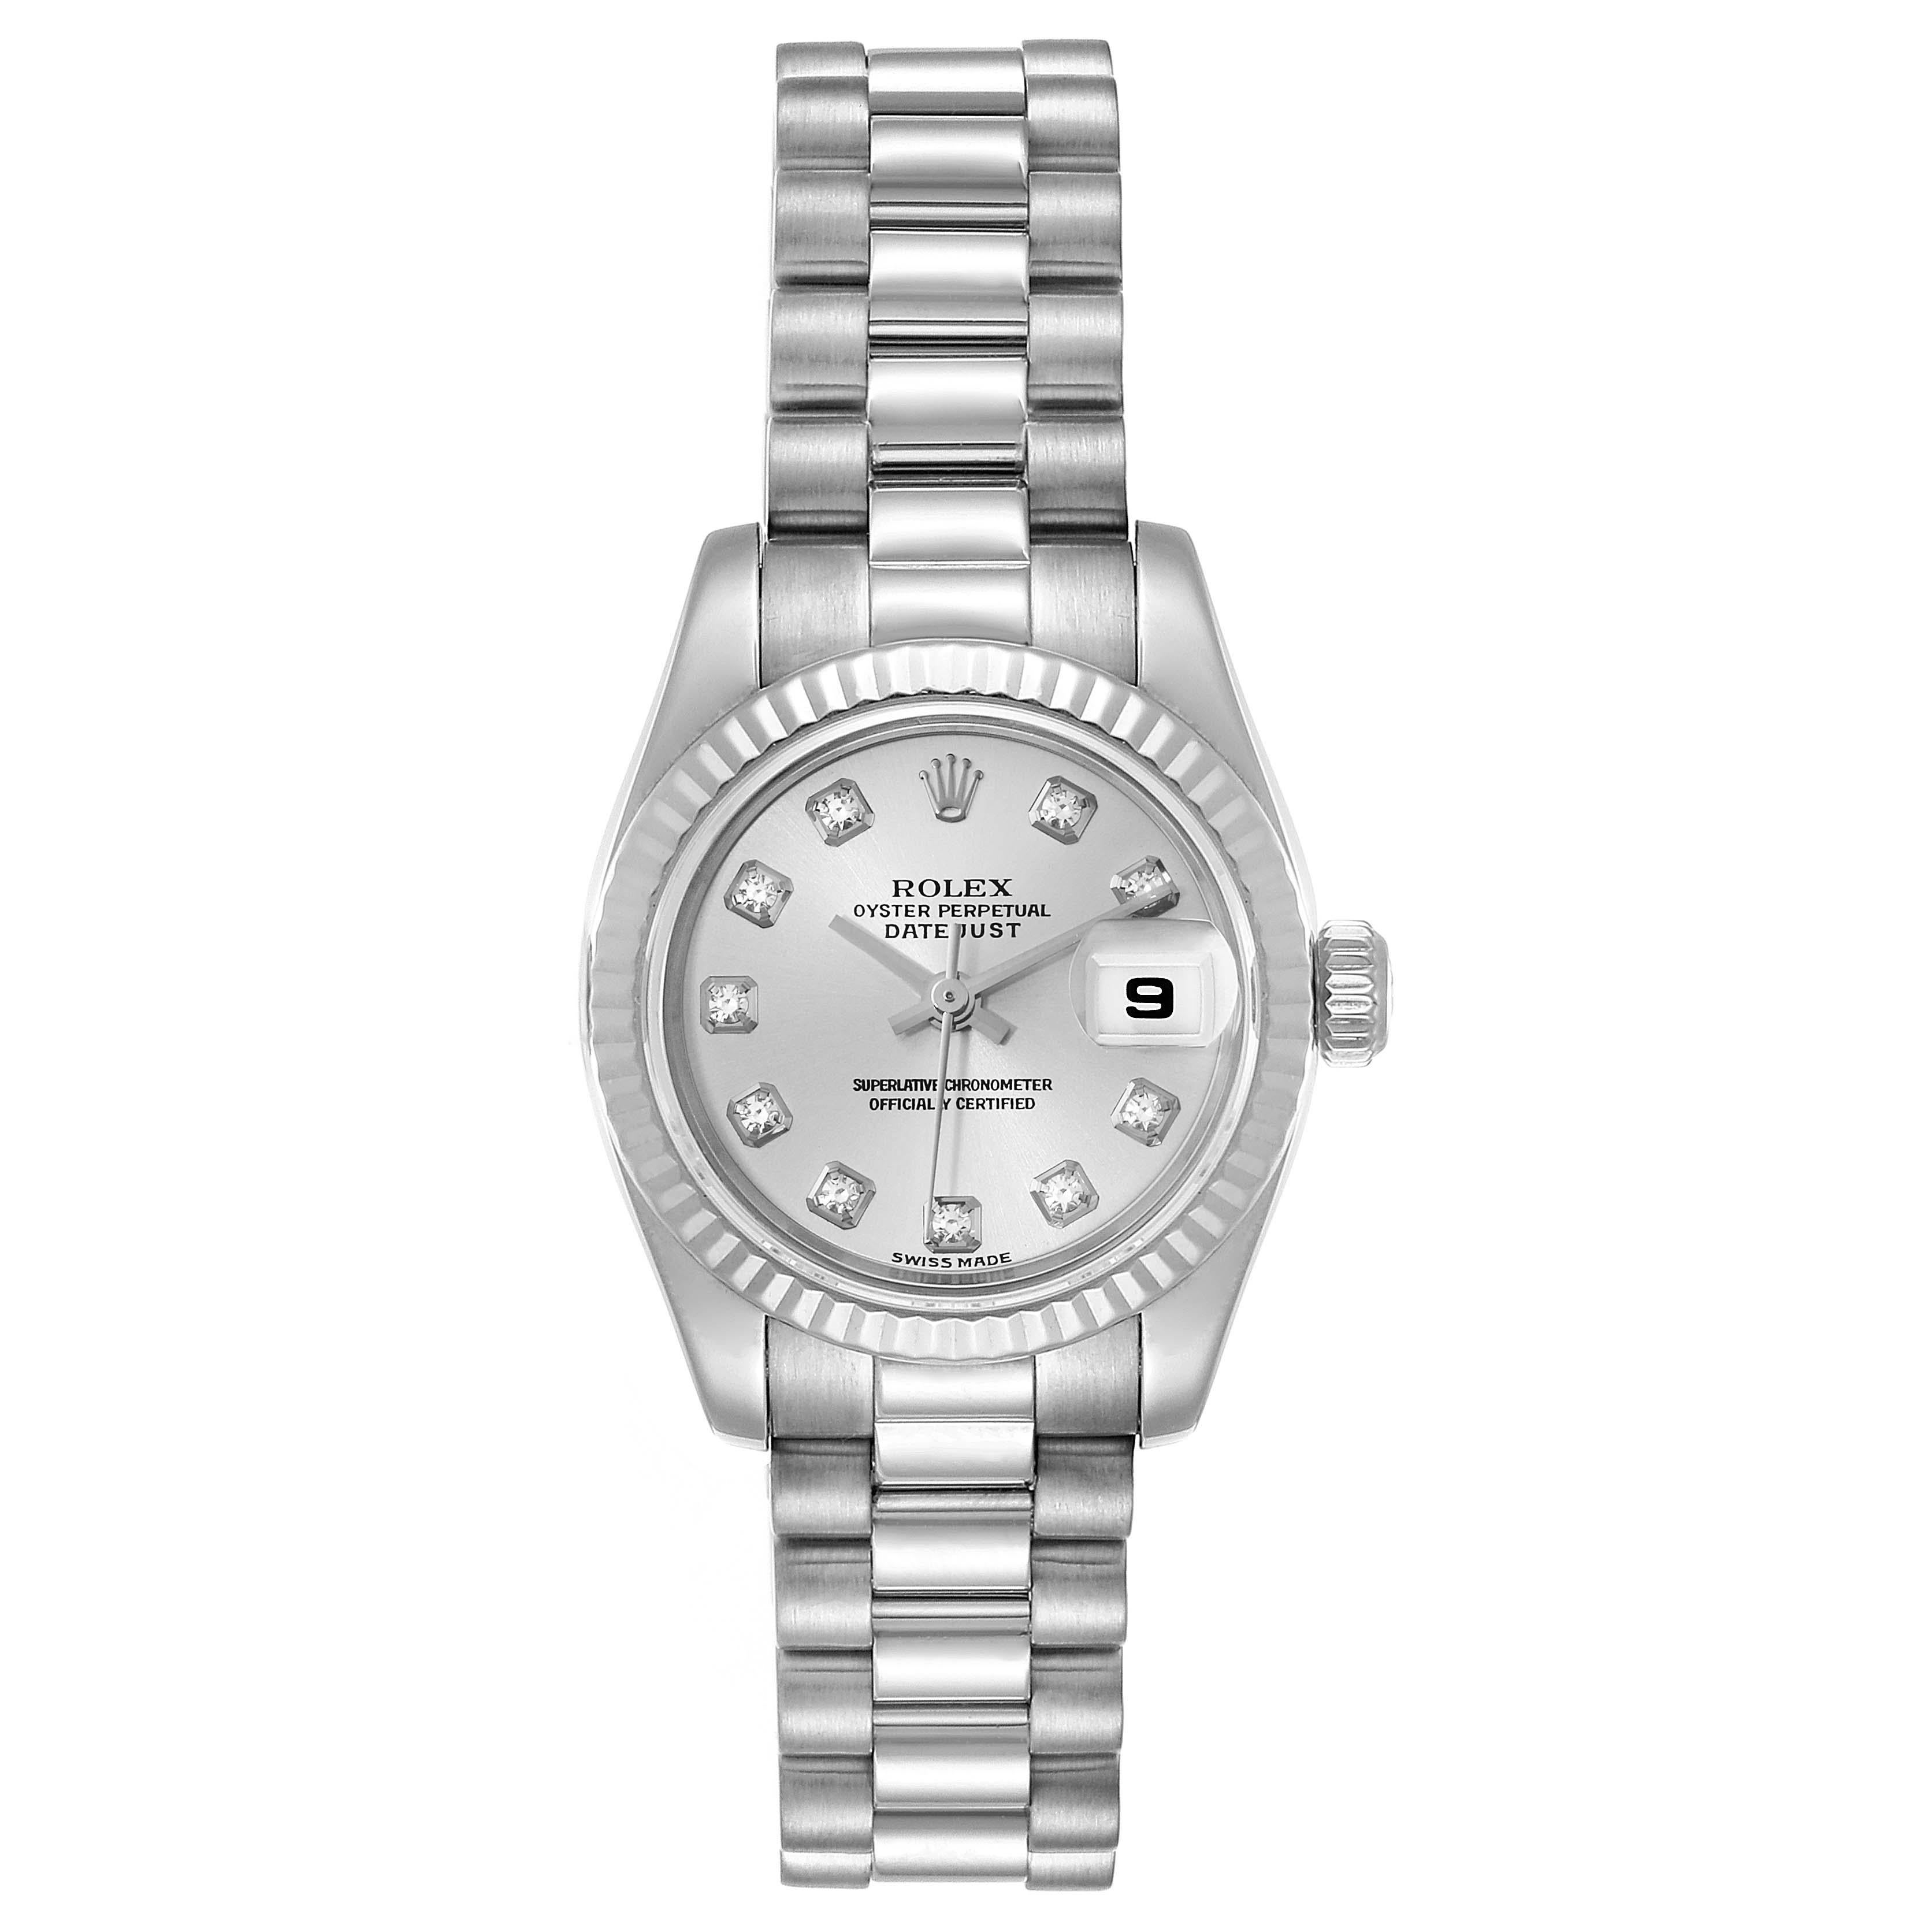 Rolex President Ladies White Gold Diamond Ladies Watch 179179 Box Papers. Officially certified chronometer self-winding movement. 18k white gold oyster case 26.0 mm in diameter. Rolex logo on a crown. 18k white gold fluted bezel. Scratch resistant